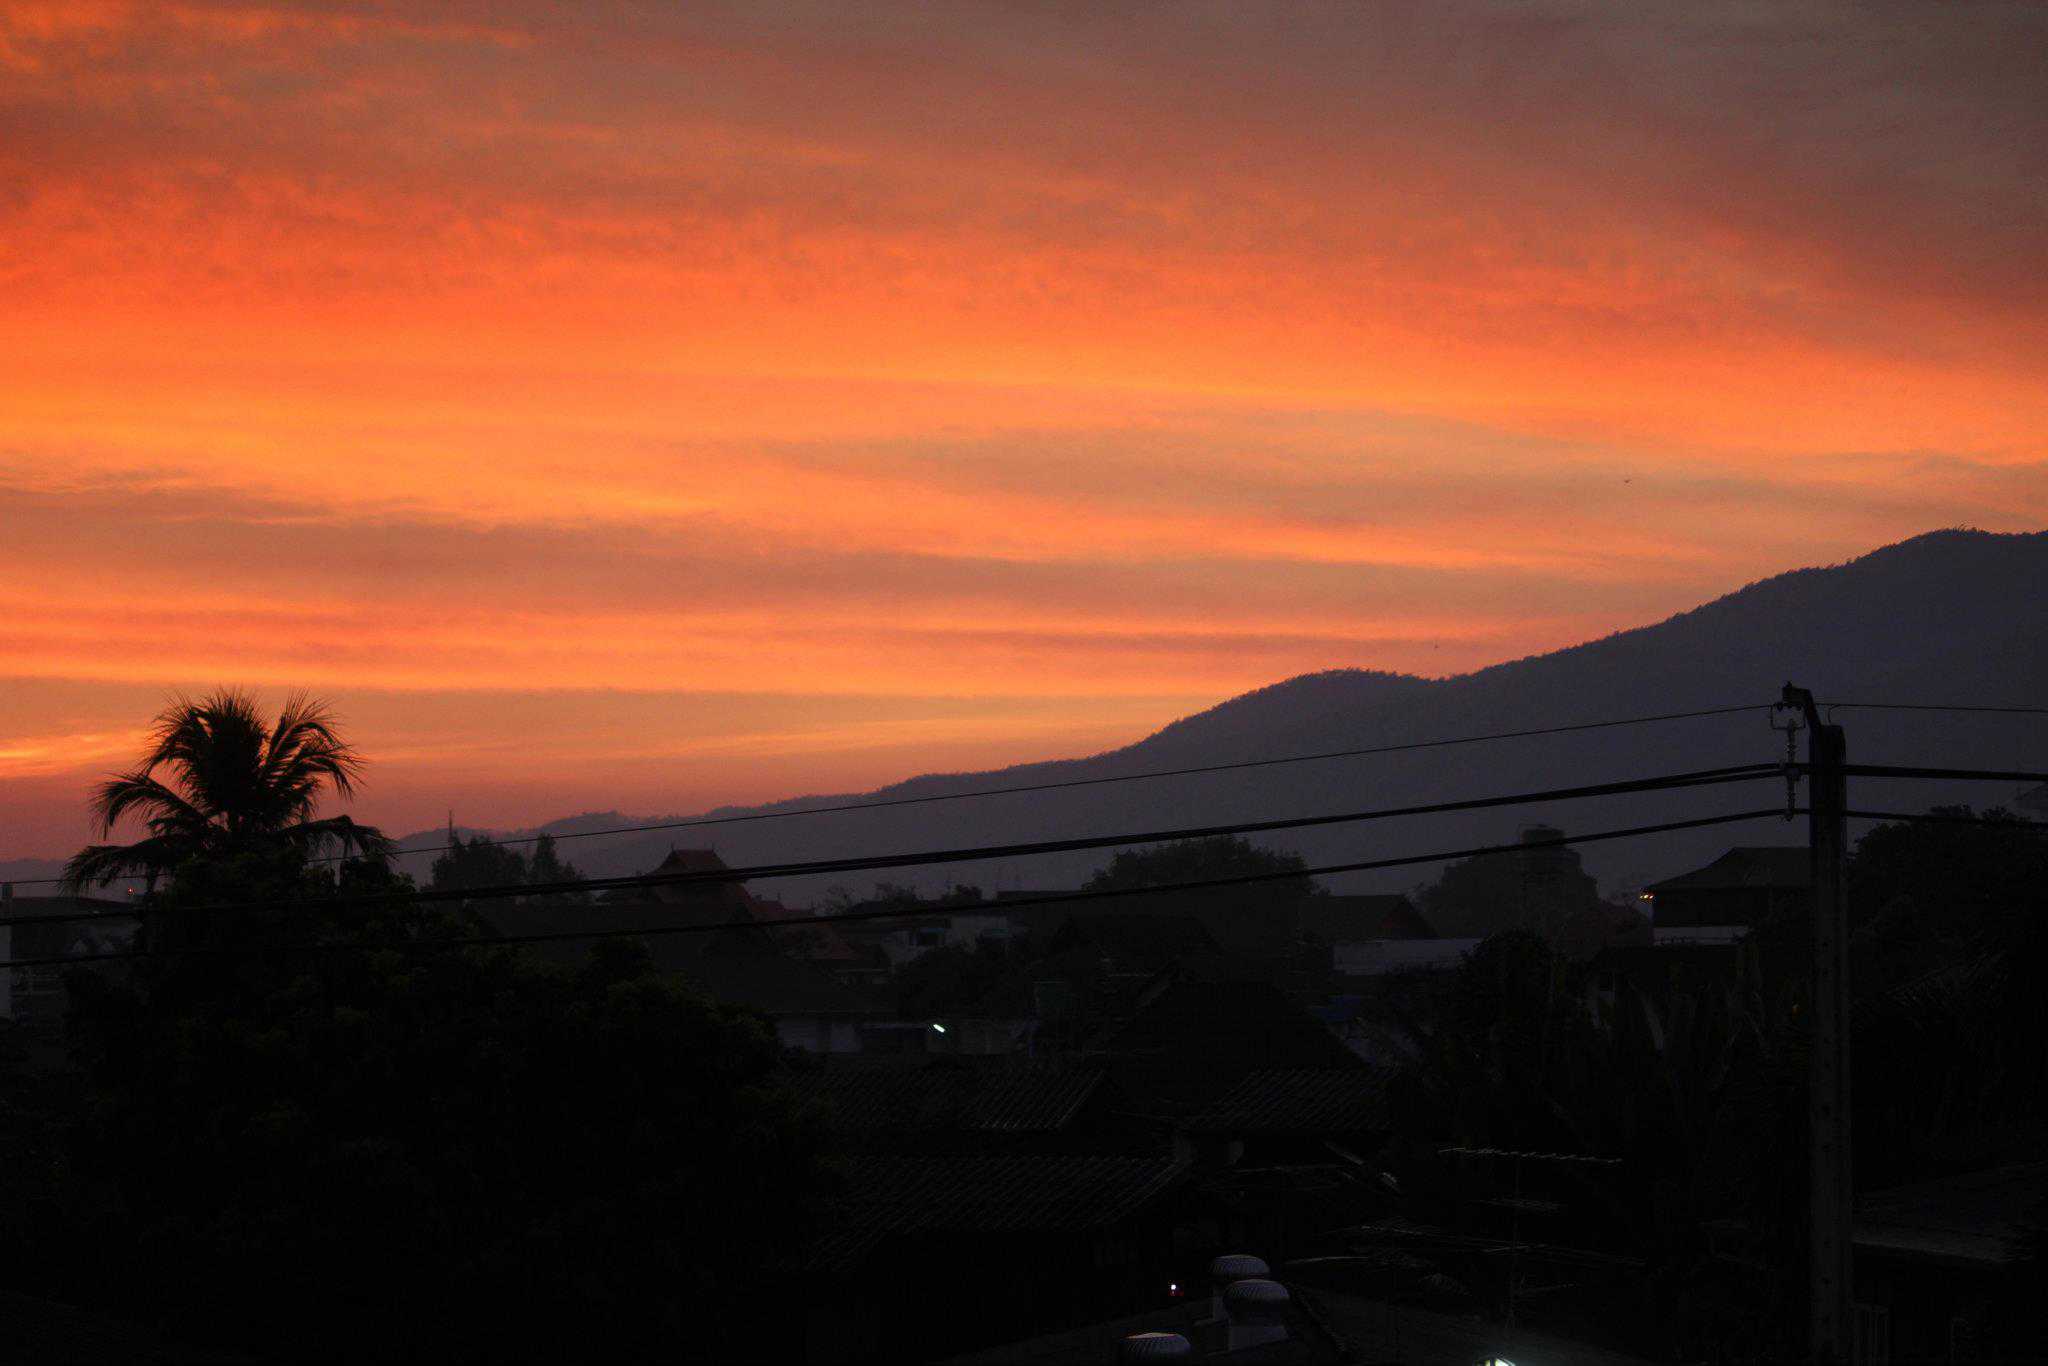 Chiang Mai sunset from my apartment